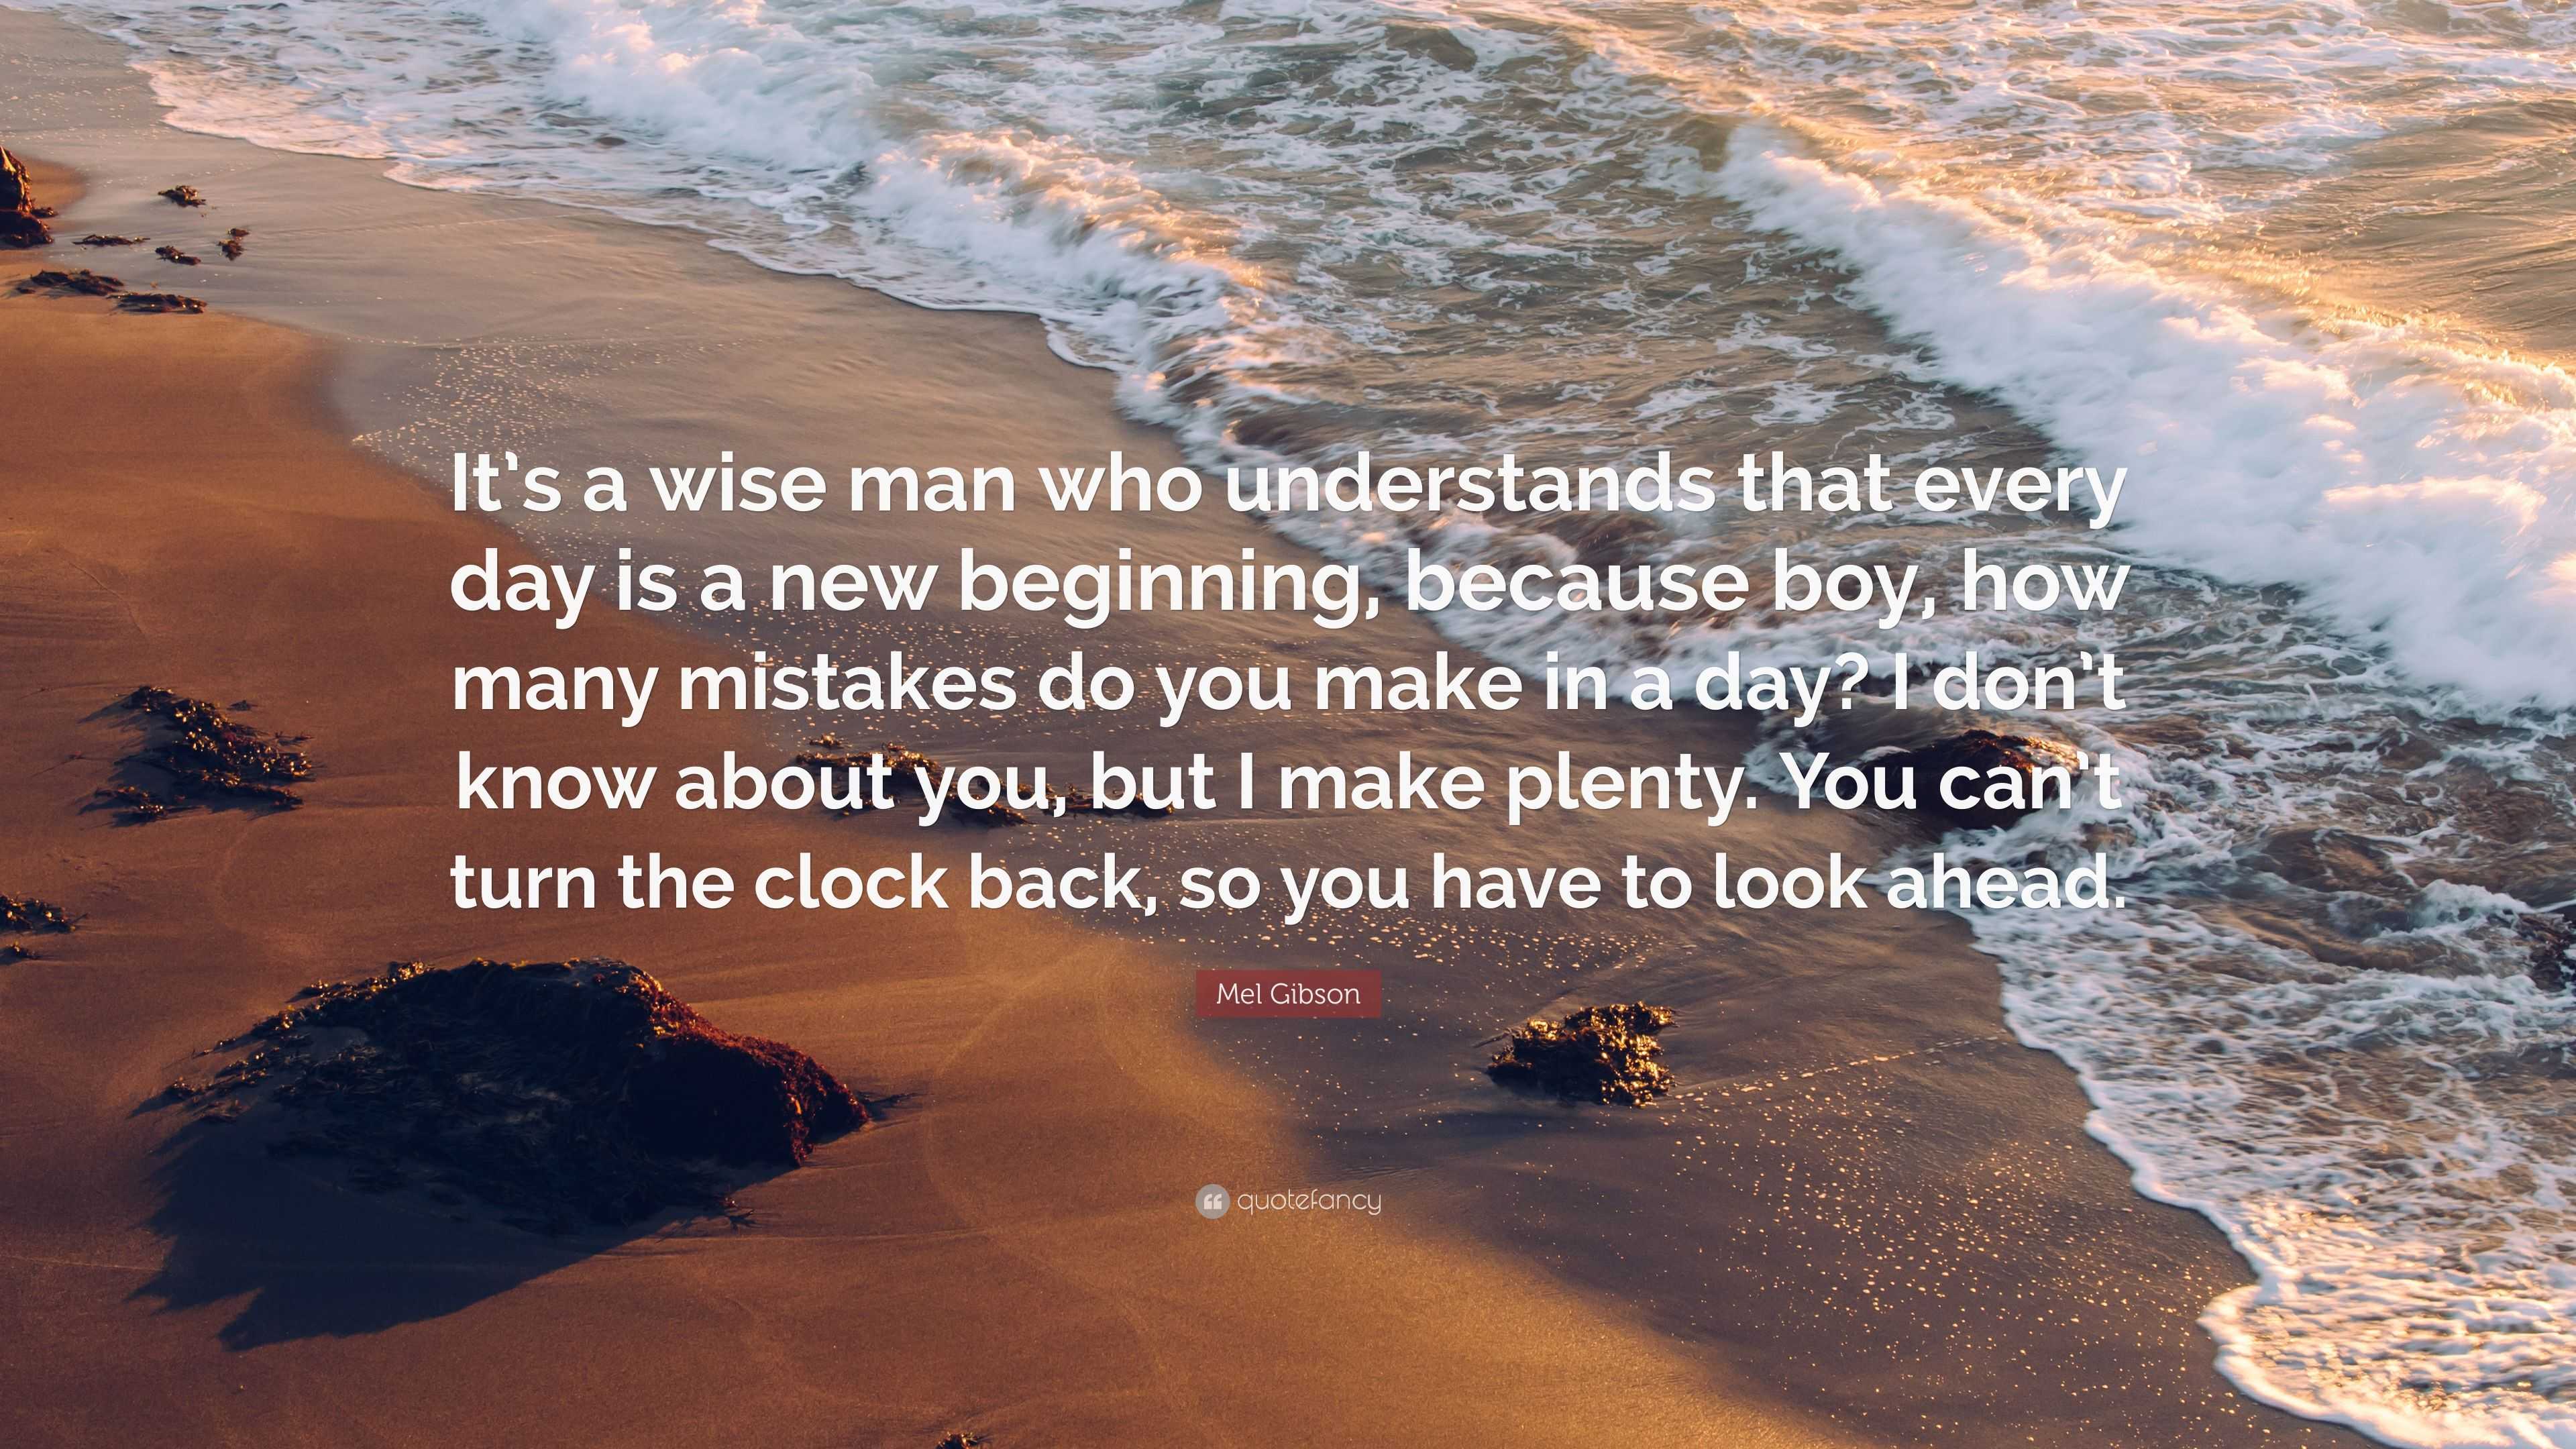 Mel Gibson Quote: “It’s a wise man who understands that every day is a ...